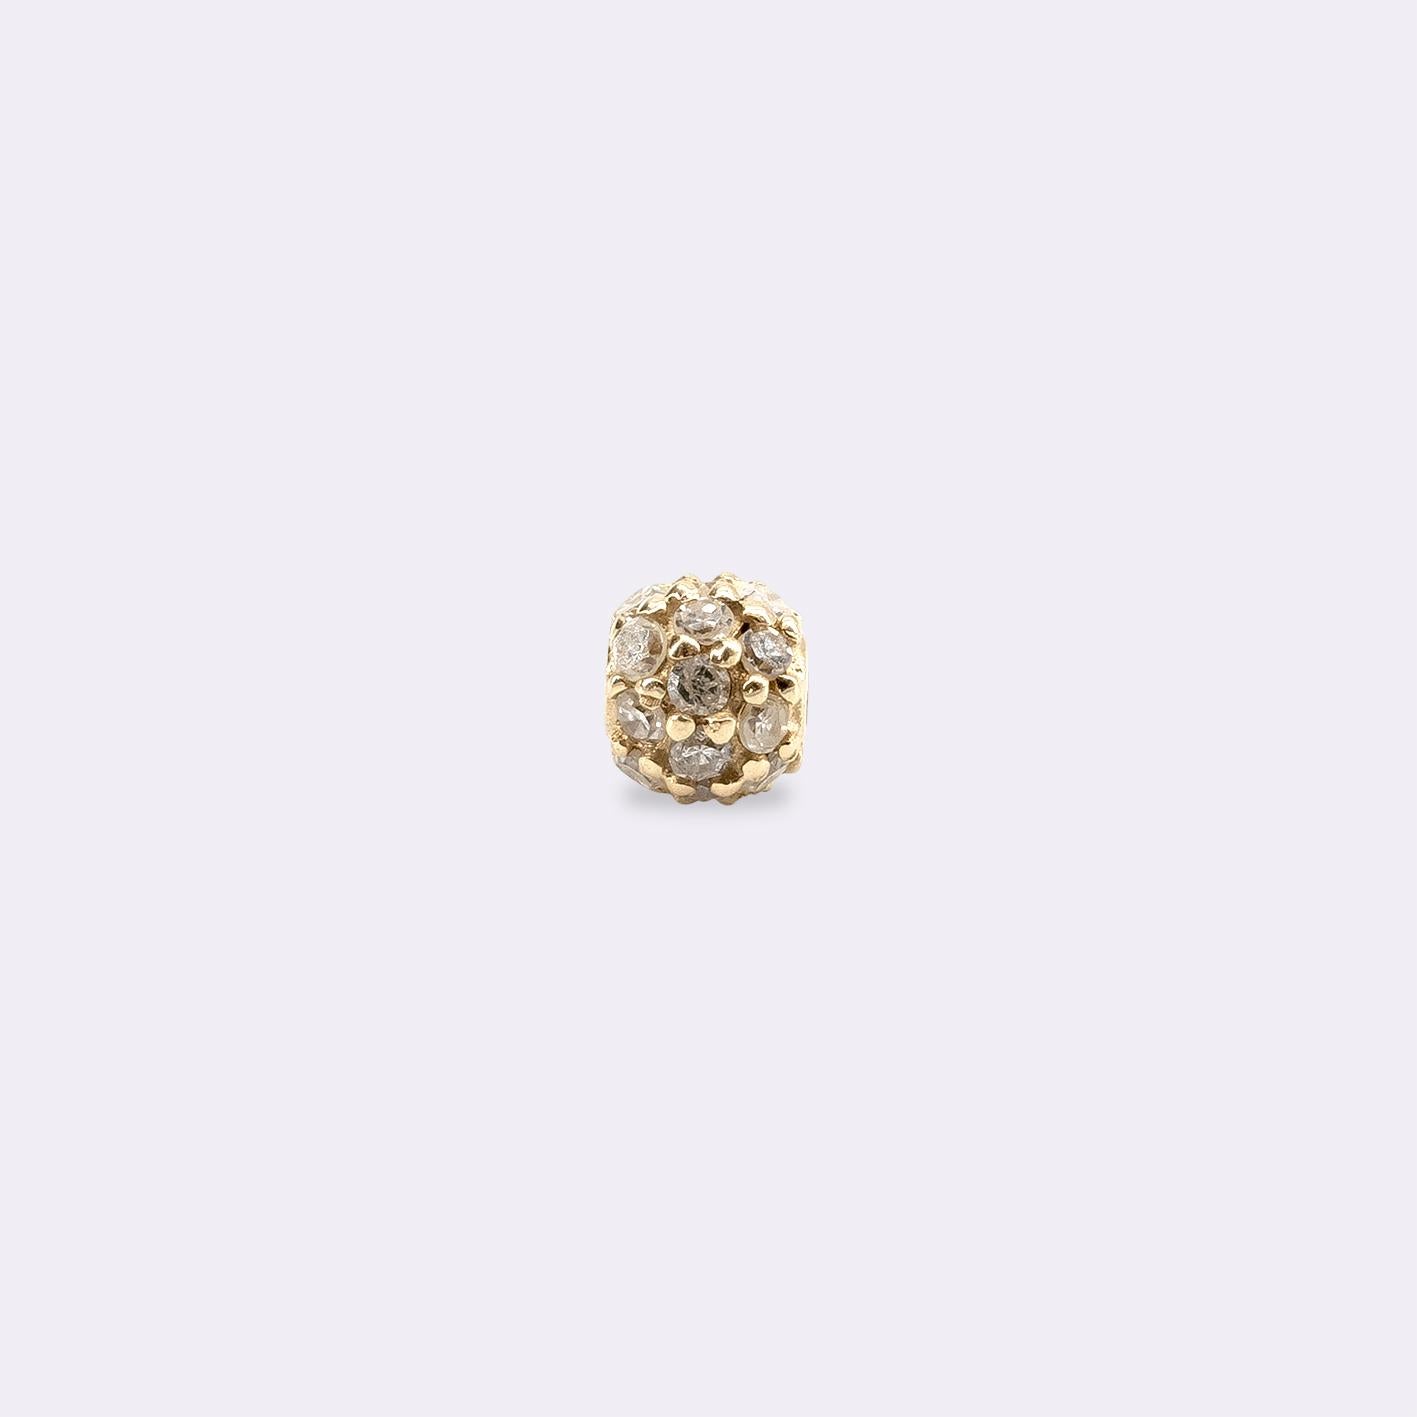 14k yellow gold
21 white diamonds
Diameter 4 mm
Red nylon drawstring closure

This bracelet is a modern classic. Its concise design speaks for itself. The bracelet is barely noticeable, but the diamond ball refracts the light in an impressive